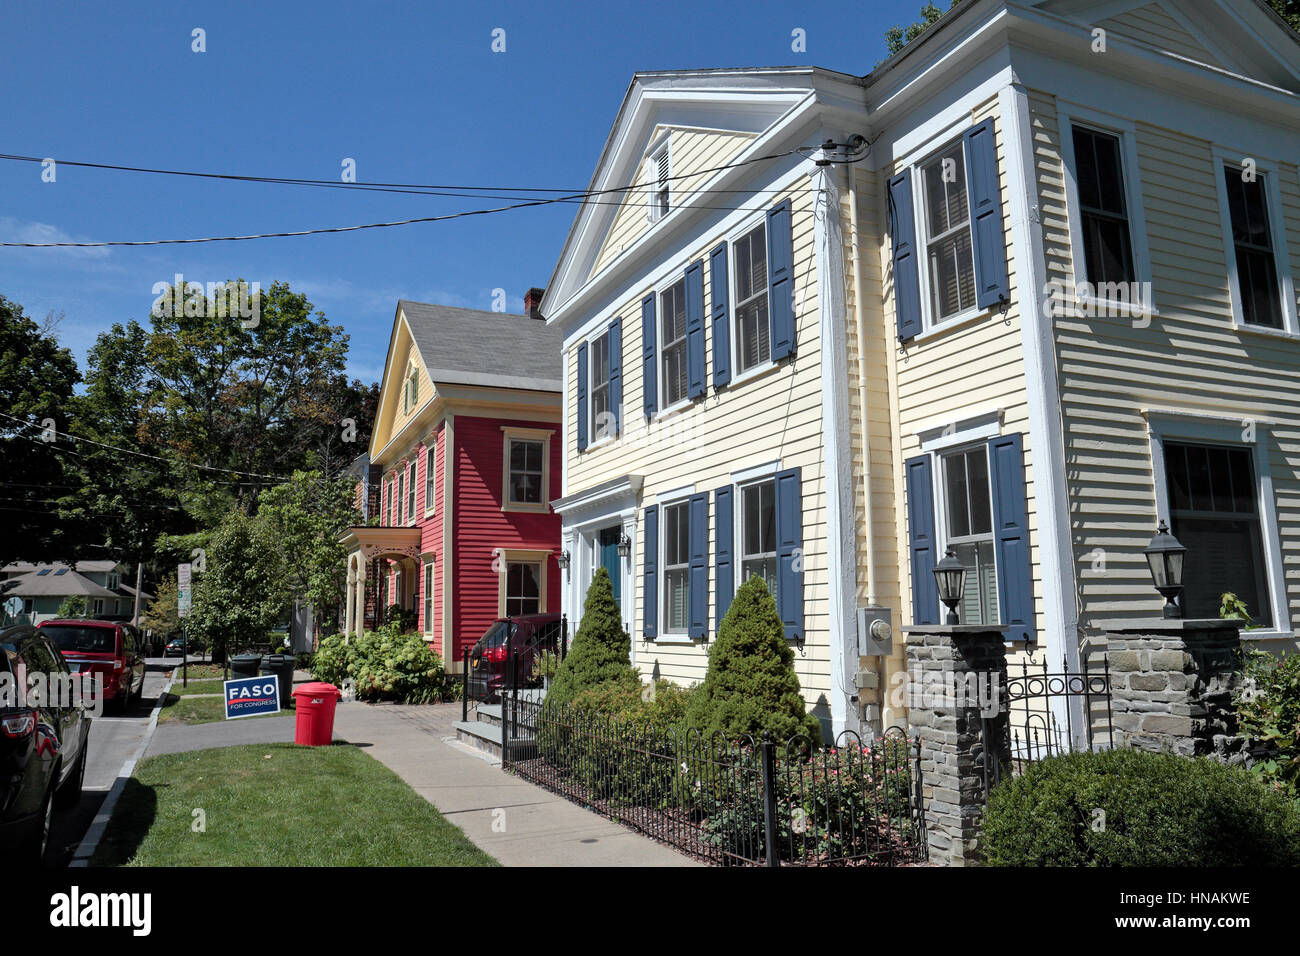 Typical housing in a residential area of Historic Cooperstown, Otsego County, New York, United States. Stock Photo